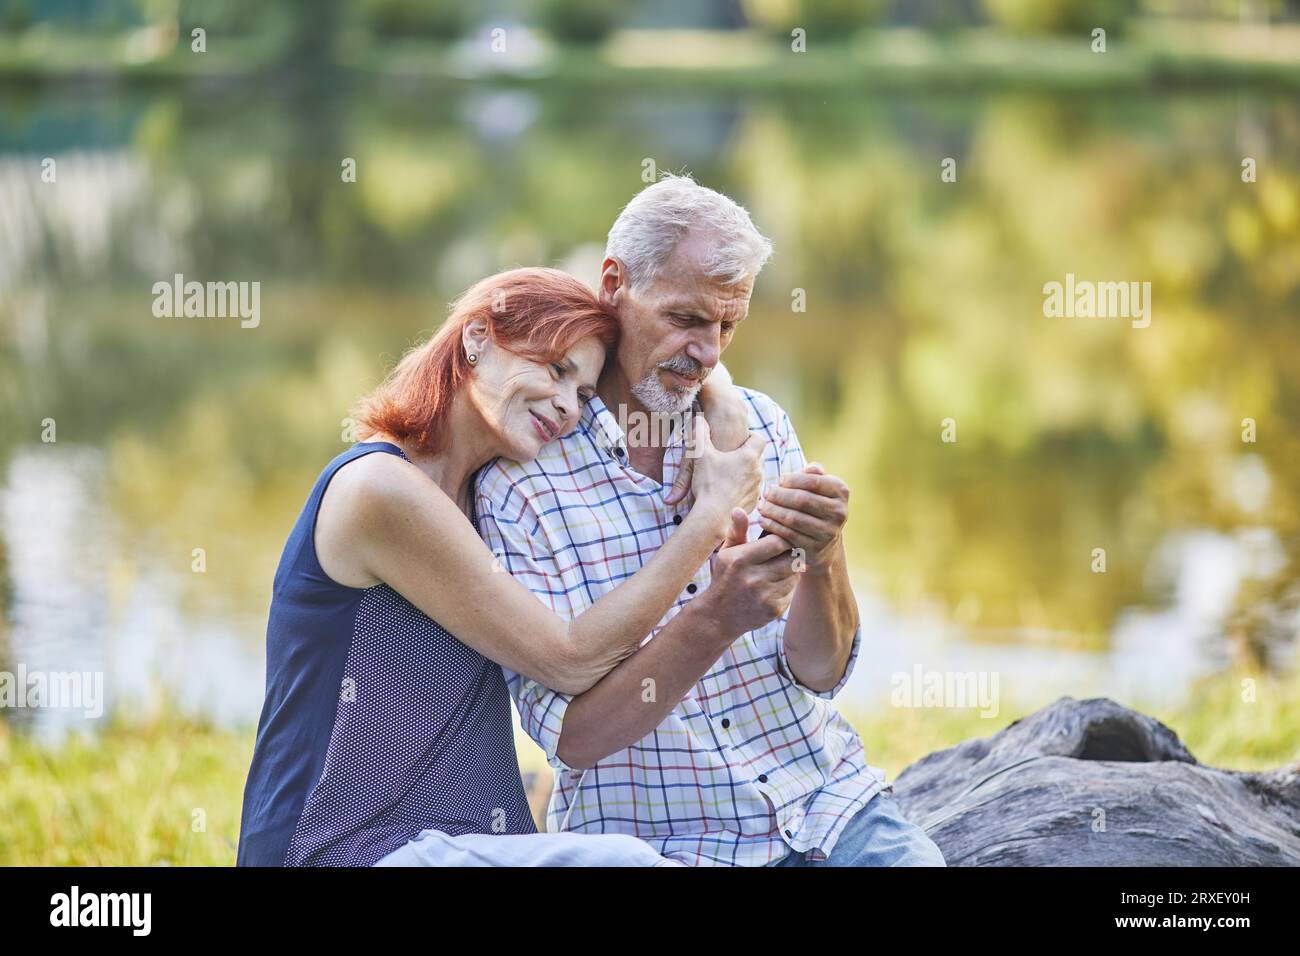 senior  woman hugging a man who is looking at the phone on outdoor Stock Photo